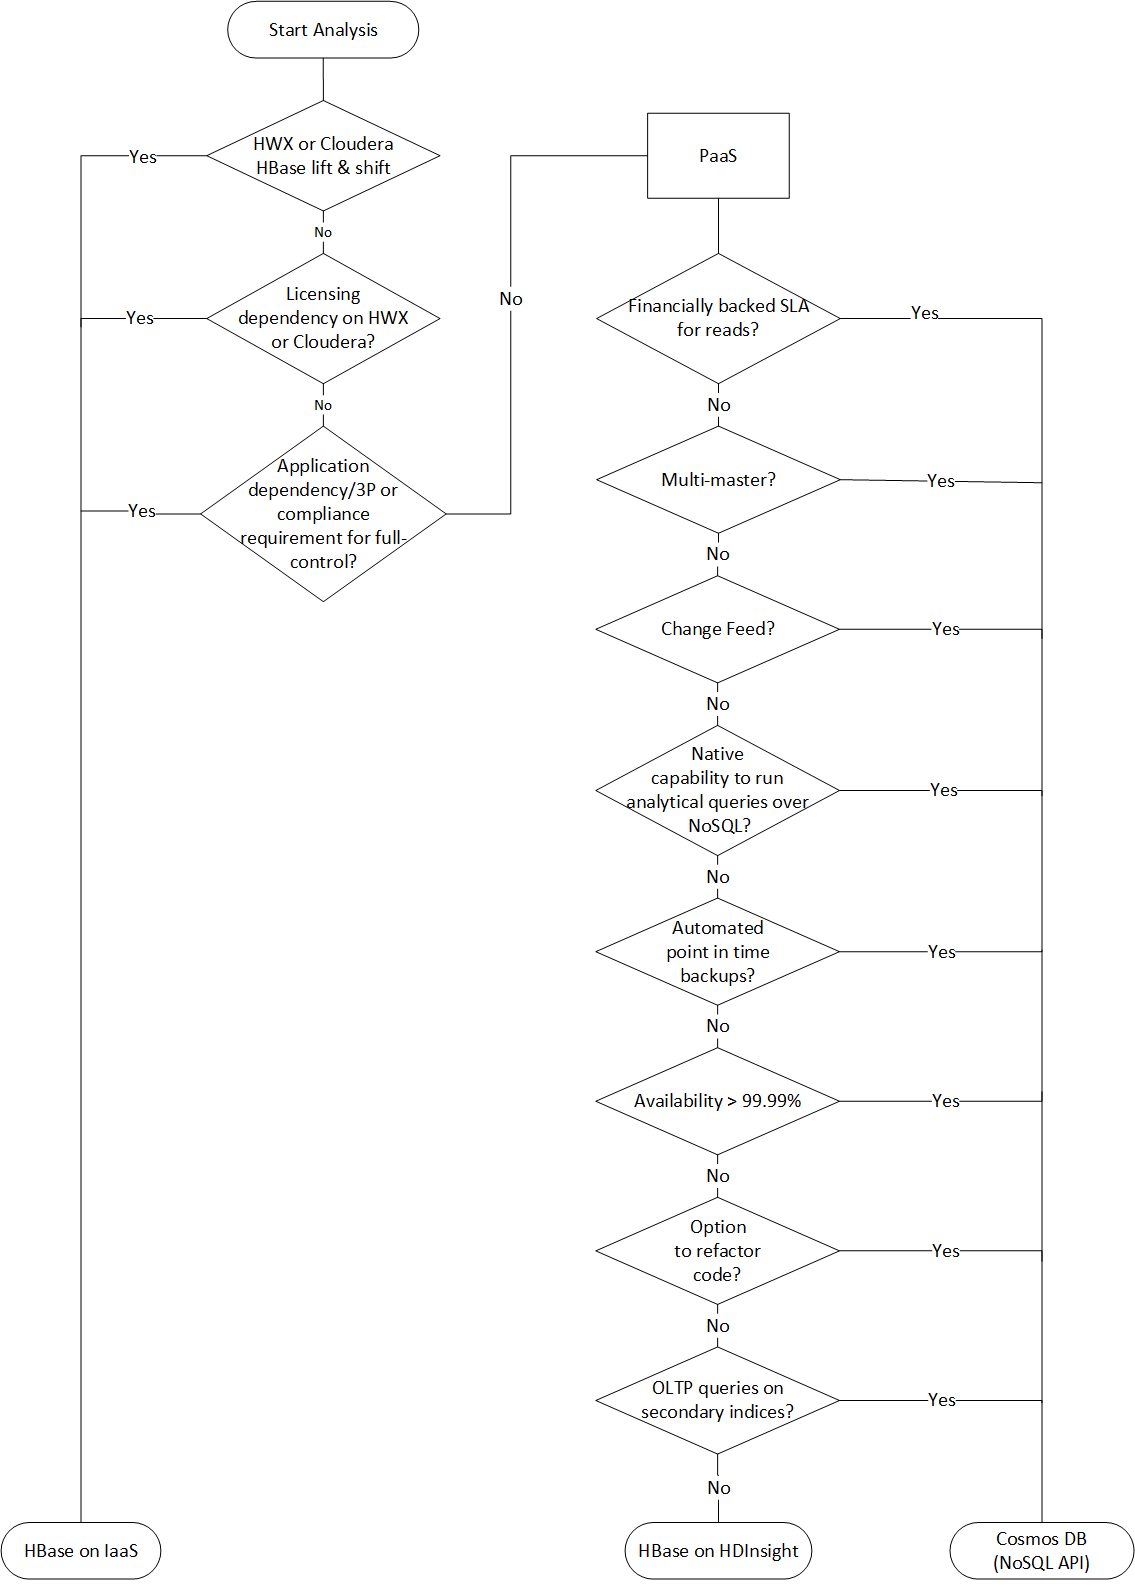 Diagram that shows a decision flowchart for selecting an Azure target environment.